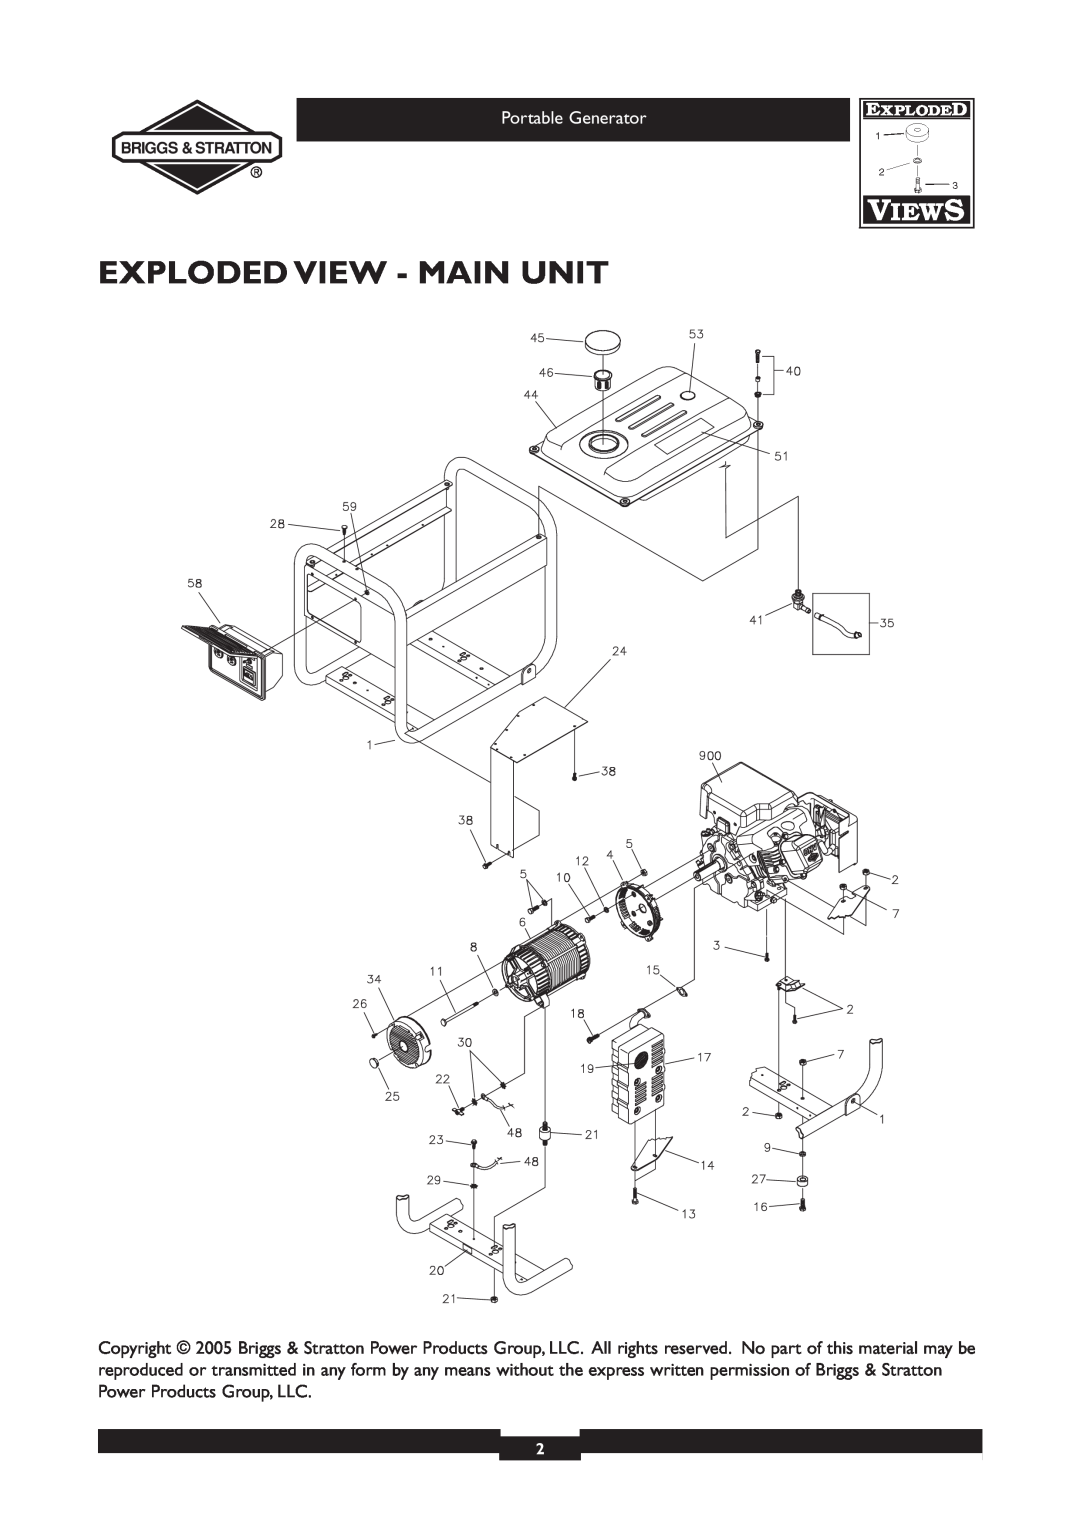 Briggs & Stratton 30213 operating instructions Exploded View - Main Unit, Portable Generator 